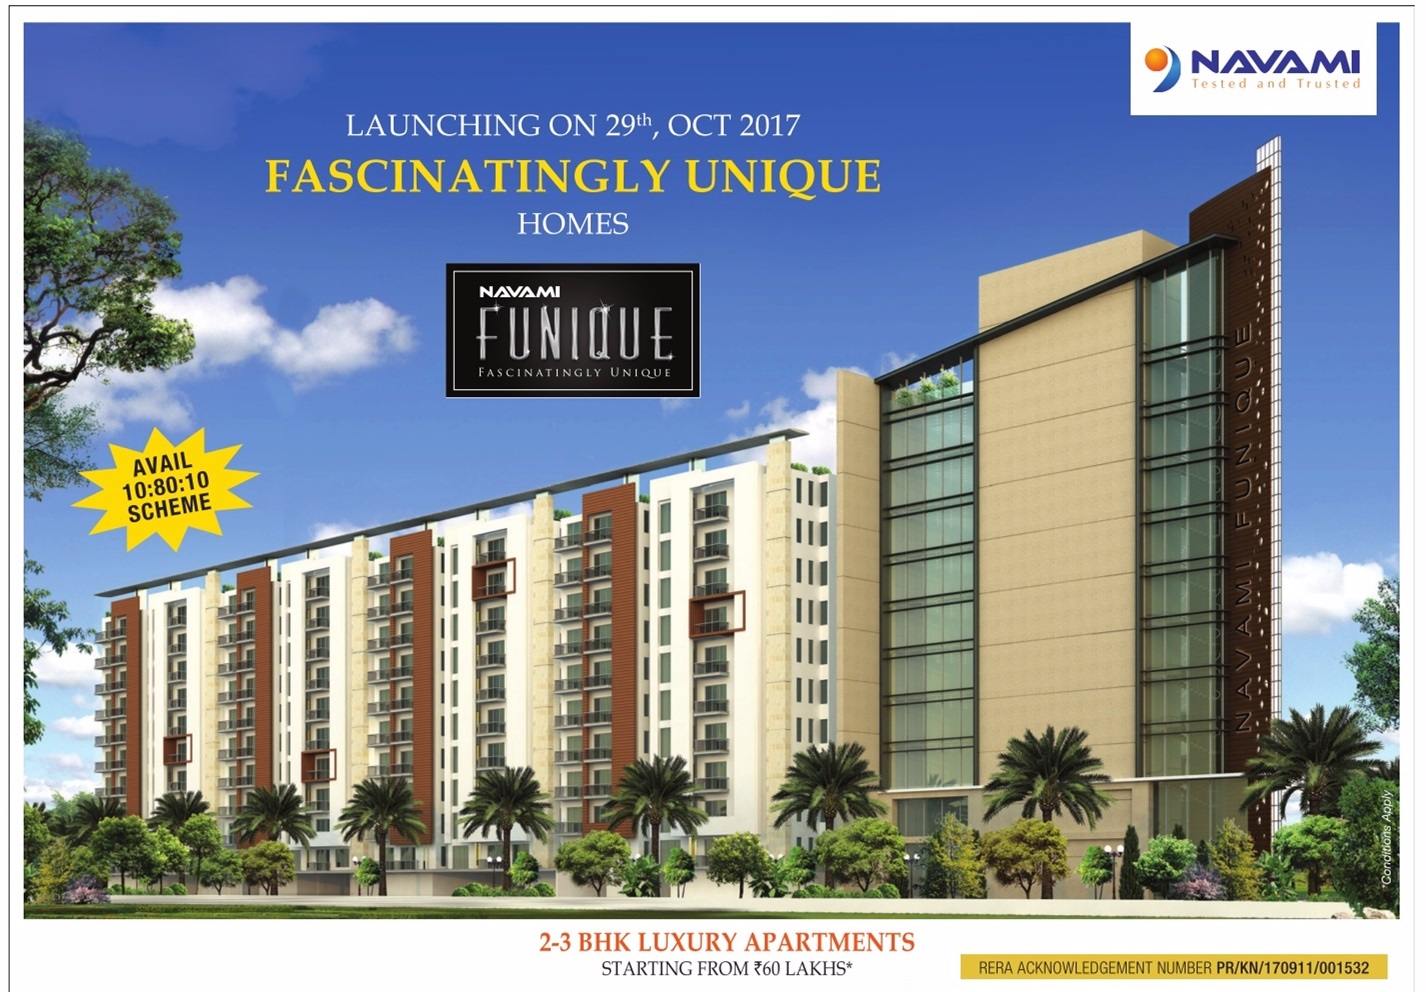 Navami Funique launching on 29th October 2017 in Bangalore Update